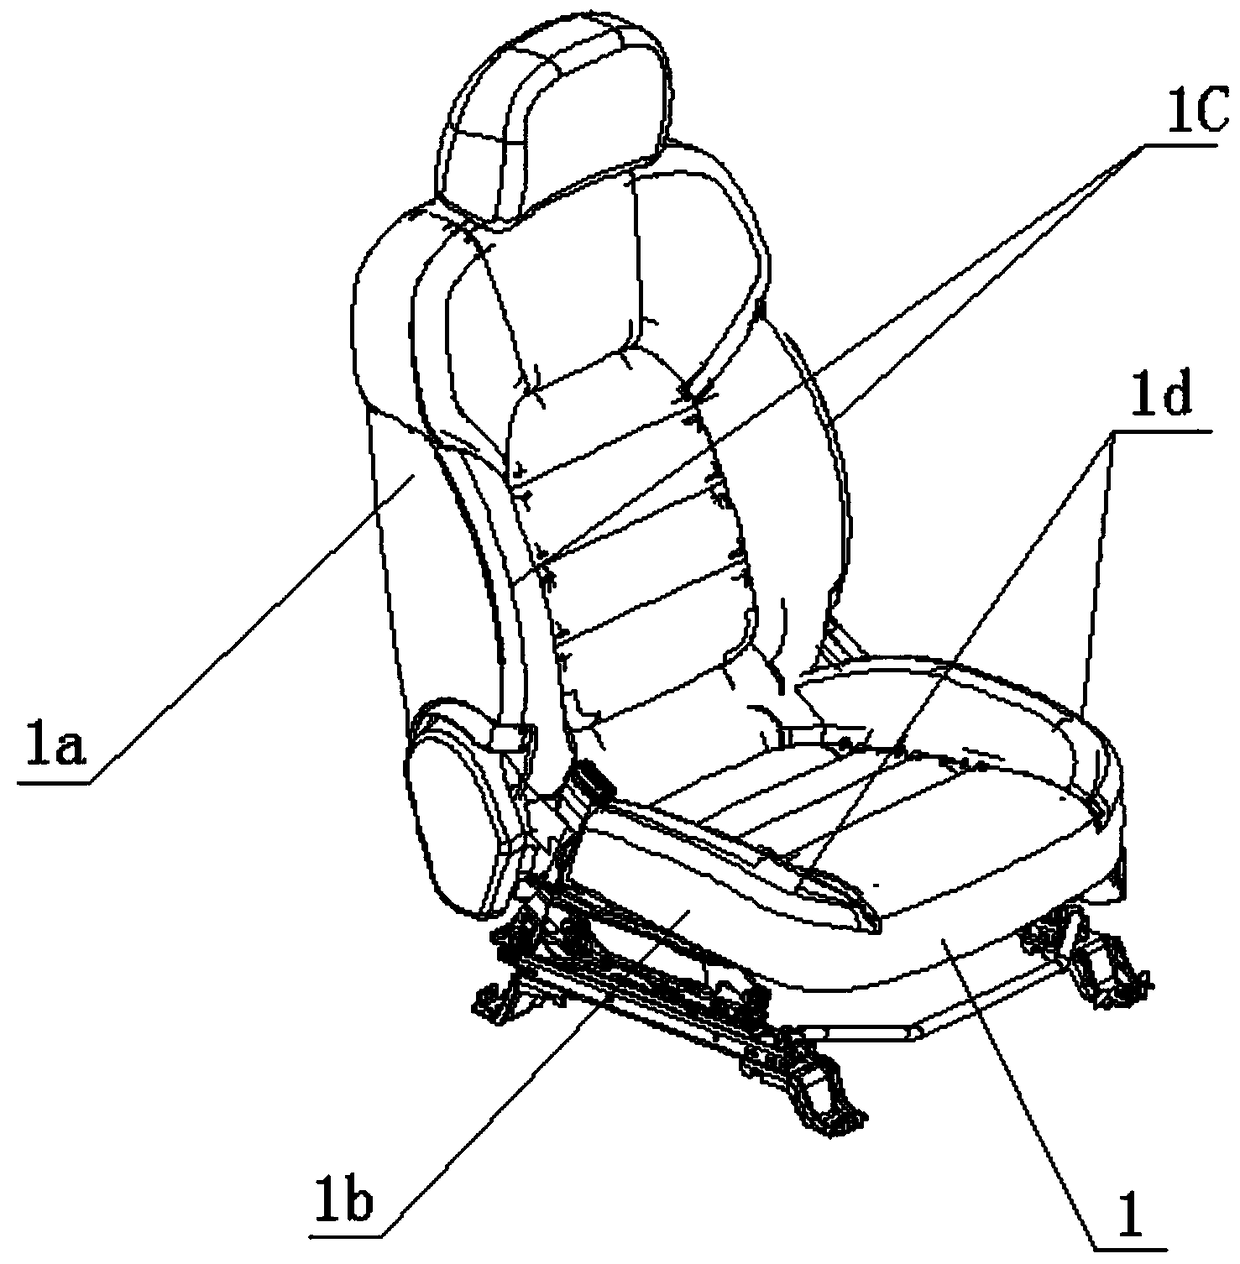 Involution type automobile safety air bag structure